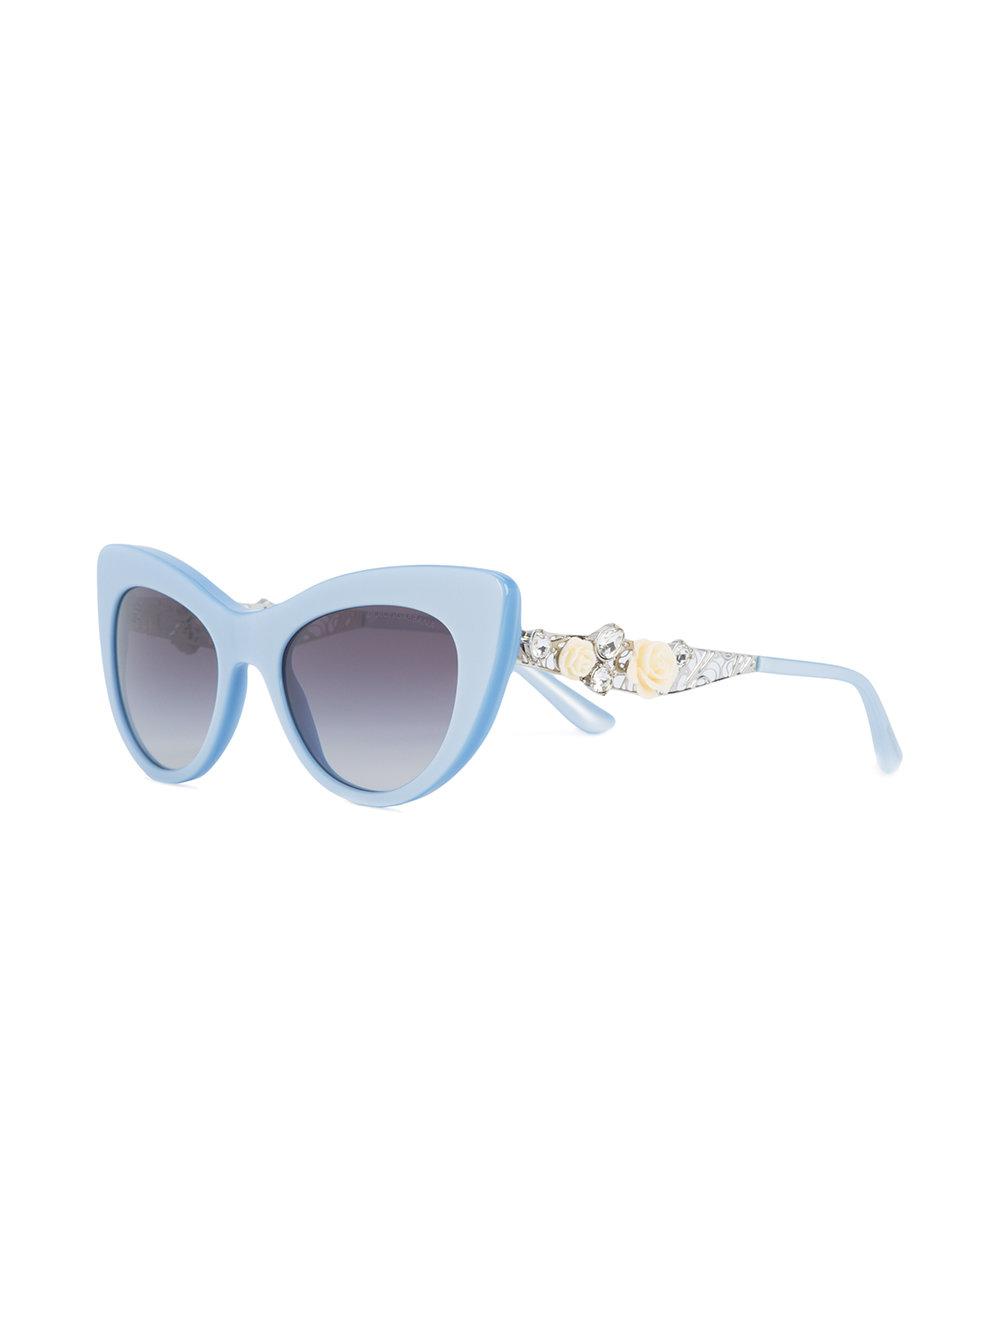 Dolce & Gabbana Lace Flowers Sunglasses in Blue - Lyst